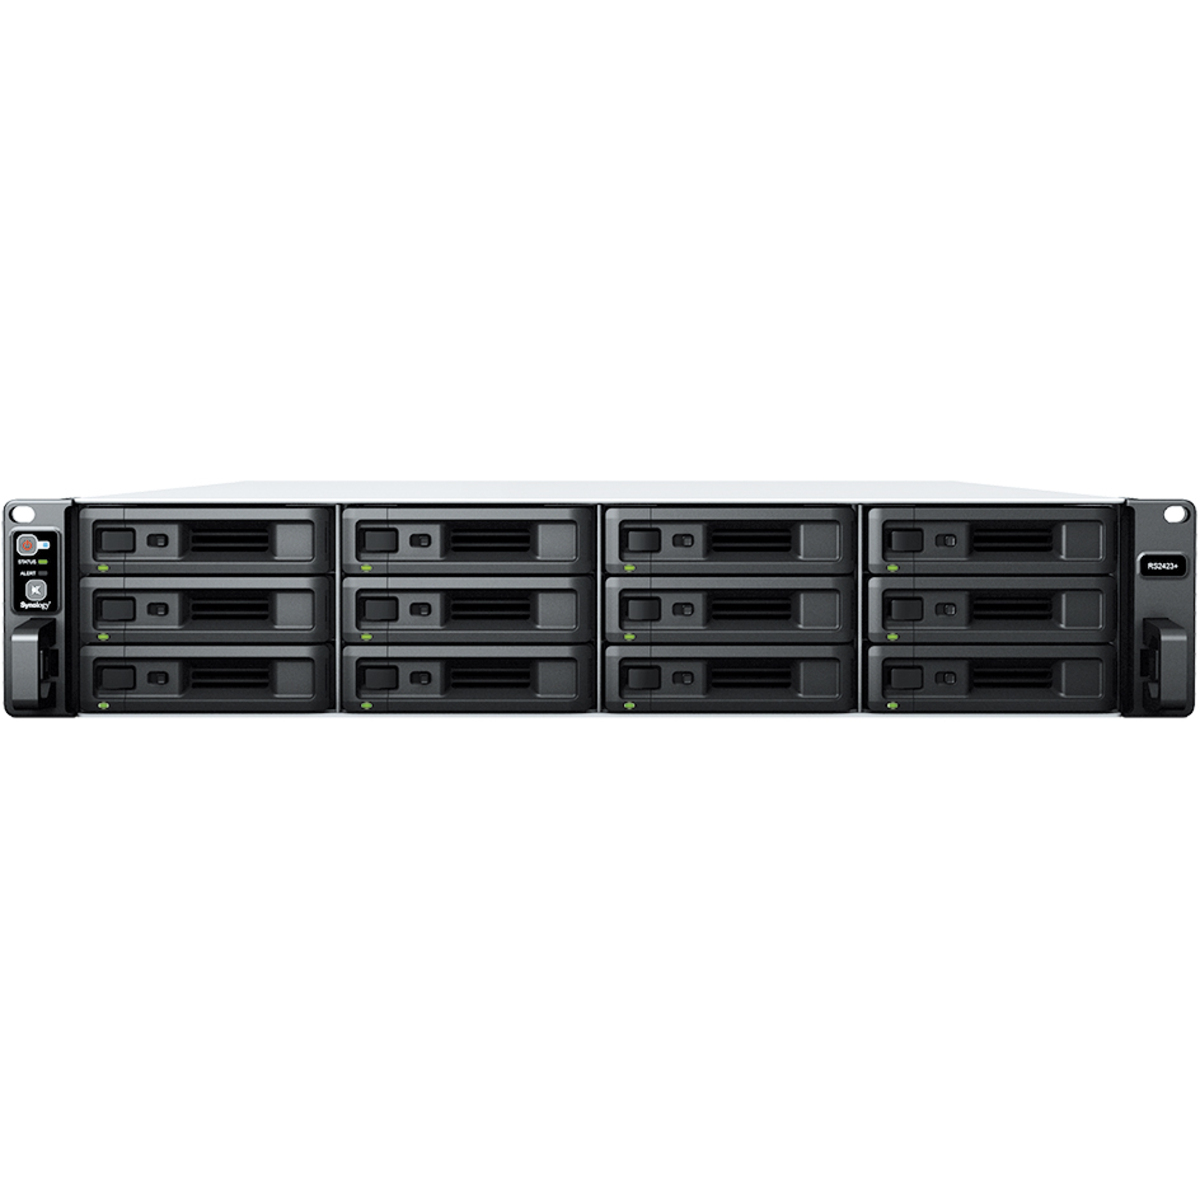 Synology RackStation RS2423+ 24tb 12-Bay RackMount Multimedia / Power User / Business NAS - Network Attached Storage Device 12x2tb Sandisk Ultra 3D SDSSDH3-2T00 2.5 560/520MB/s SATA 6Gb/s SSD CONSUMER Class Drives Installed - Burn-In Tested RackStation RS2423+